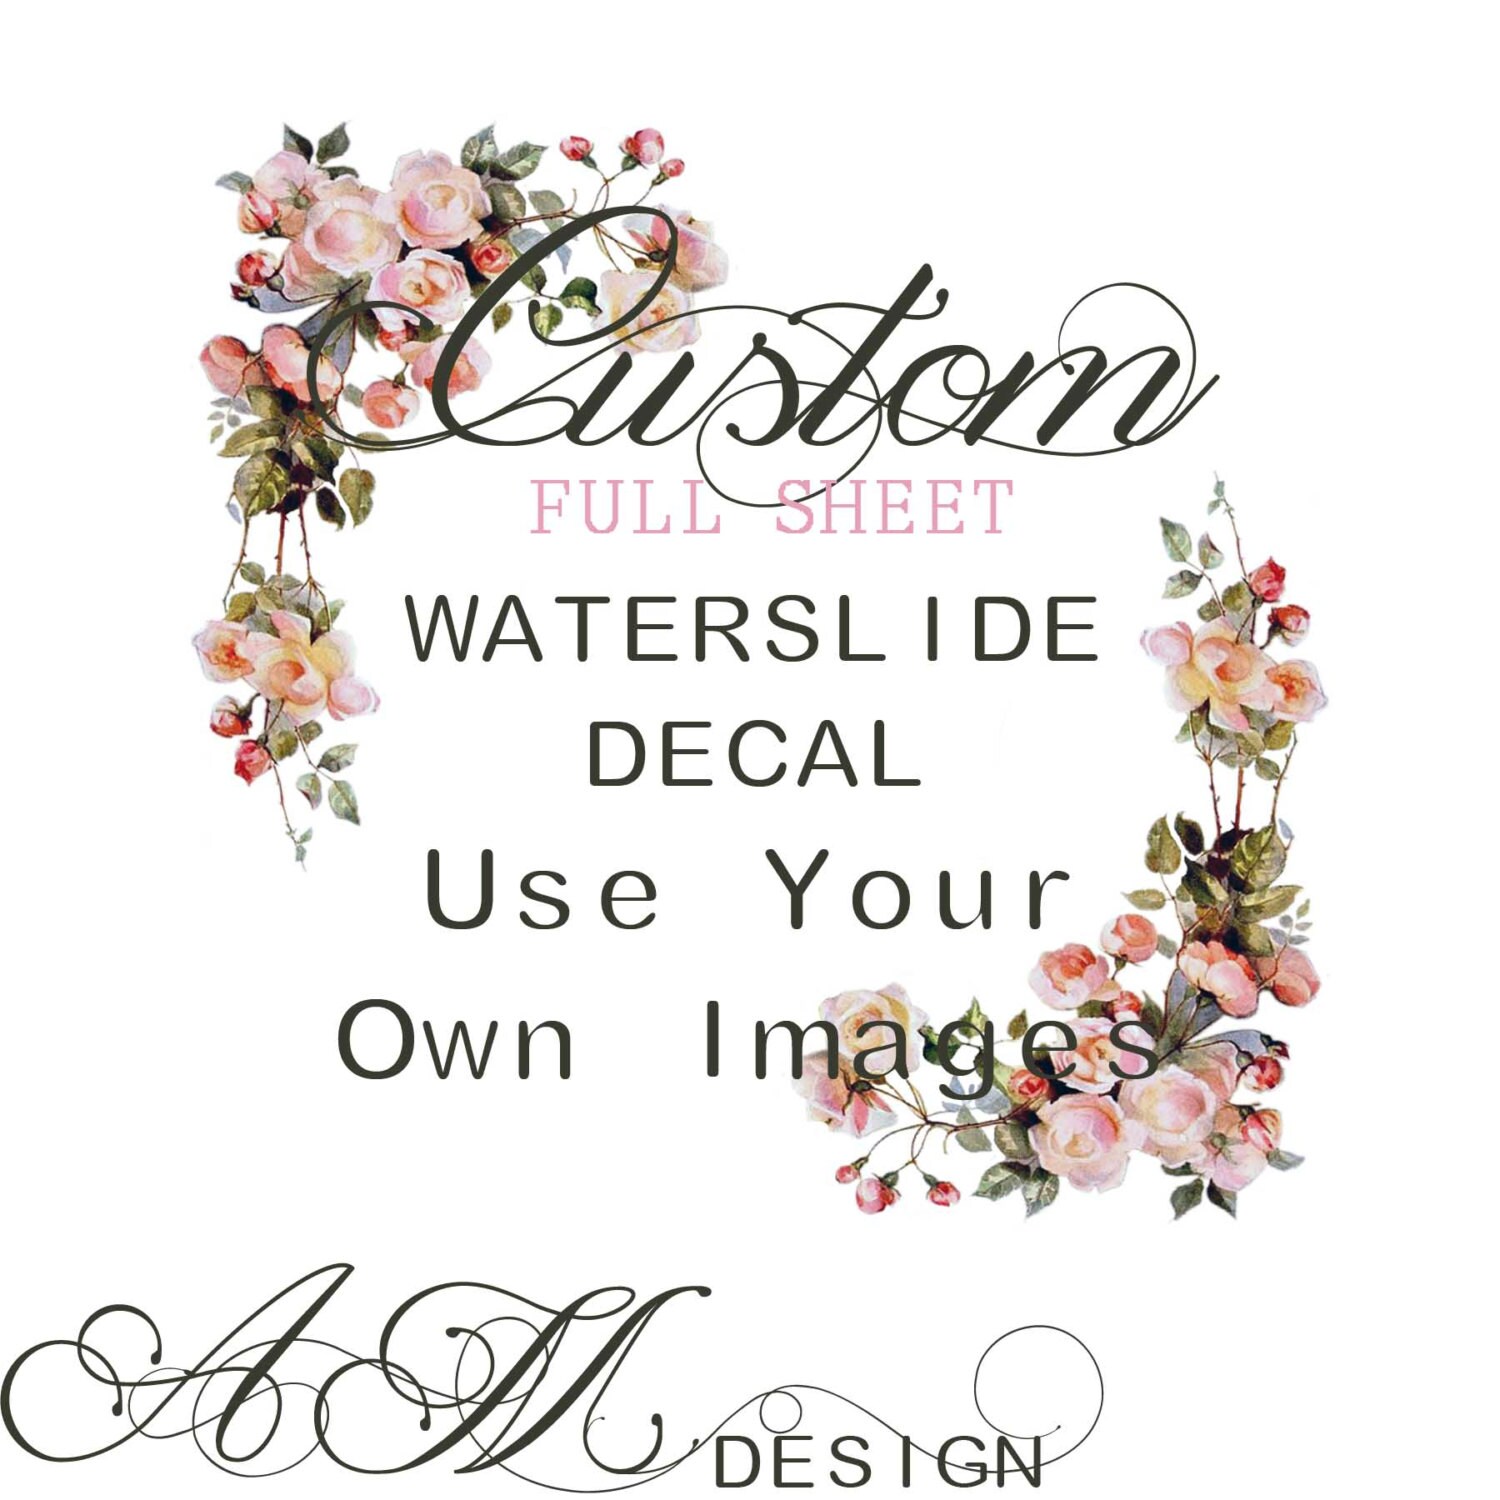 FULL SHEET Custom Waterslide Decal for Use You Own Images and